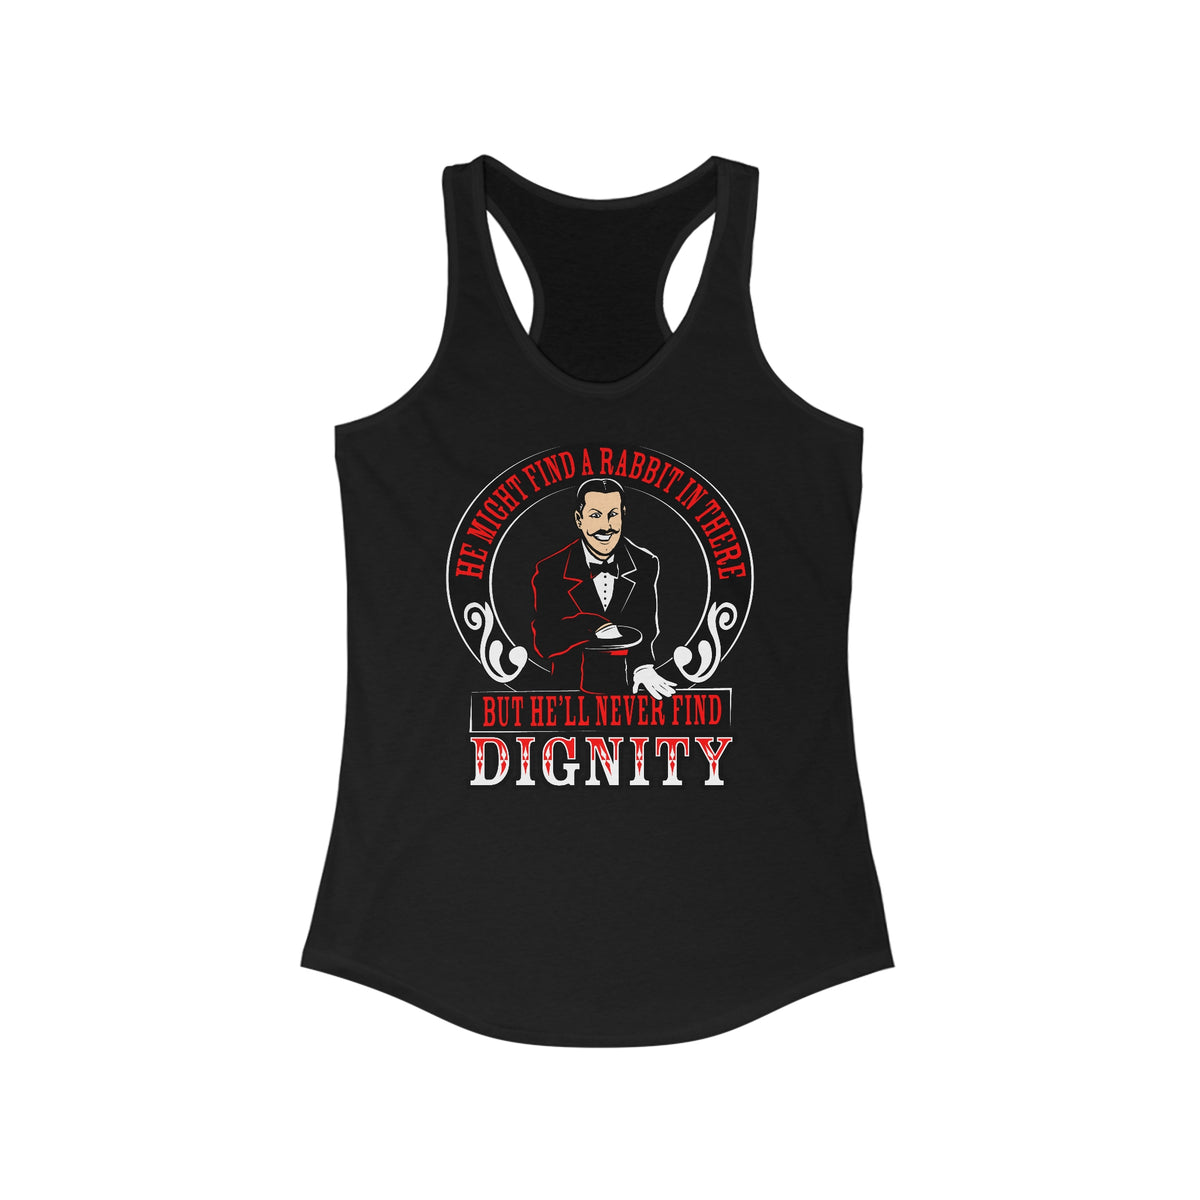 He Might Find A Rabbit In There - But He'll Never Find Dignity  - Women’s Racerback Tank